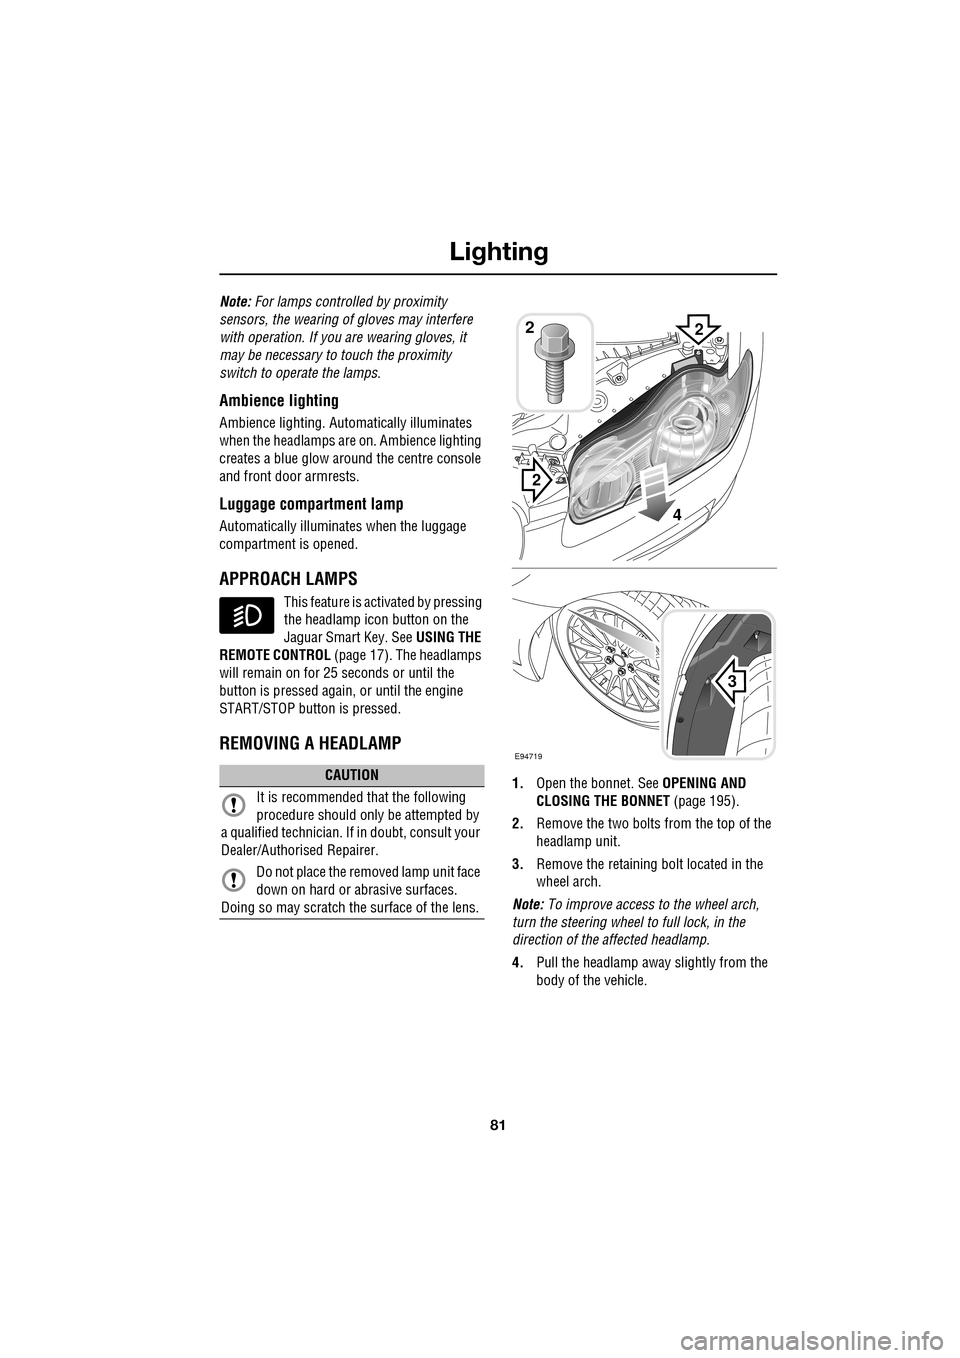 JAGUAR XF 2009 1.G User Guide 81
Lighting
               
Note: For lamps controlled by proximity 
sensors, the wearing of gloves may interfere 
with operation. If you  are wearing gloves, it 
may be necessary to  touch the proxim